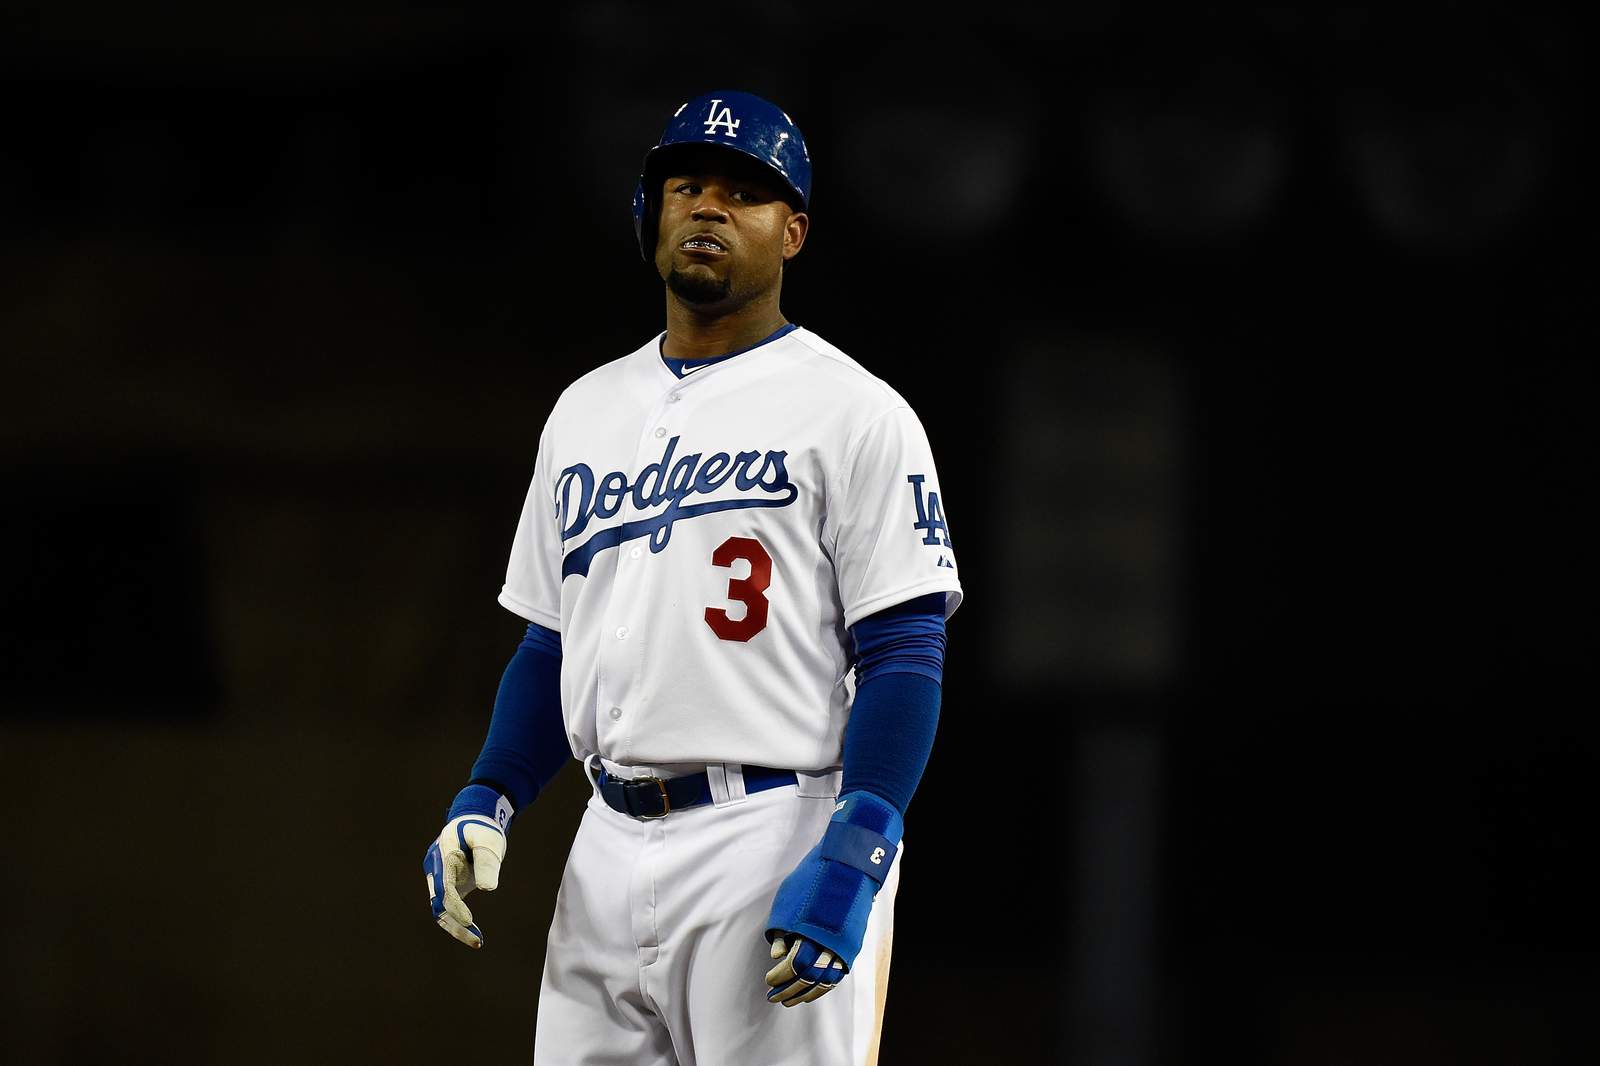 Parent of 5-year-old suing former MLB player Carl Crawford for $1M over drowning at Houston home